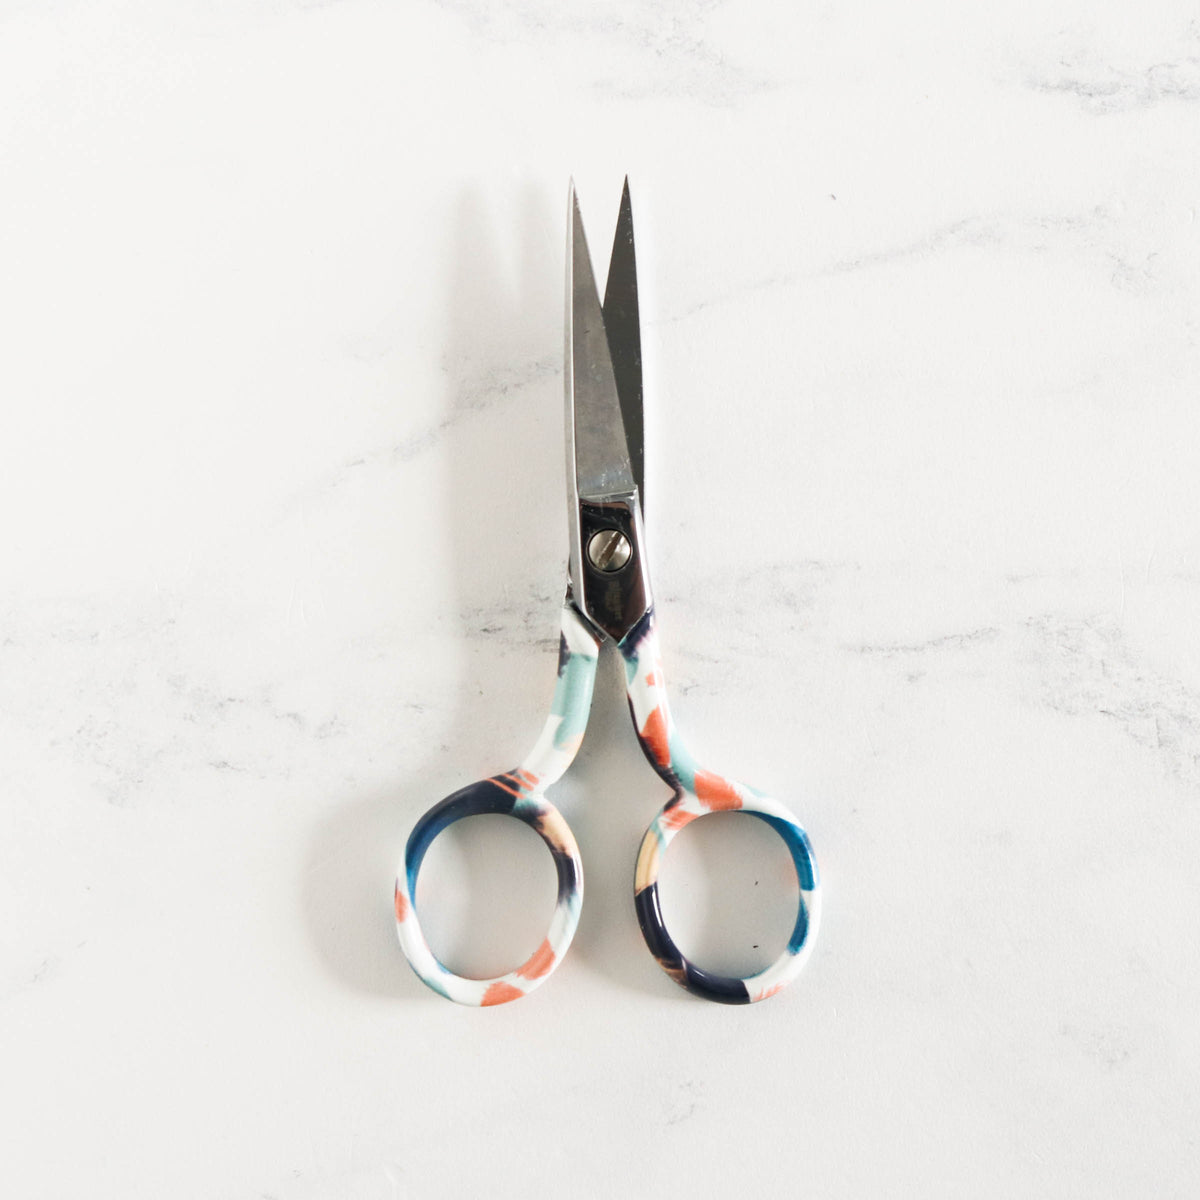 Gingher Designer Series Shears and Embroidery Scissors - Rynn